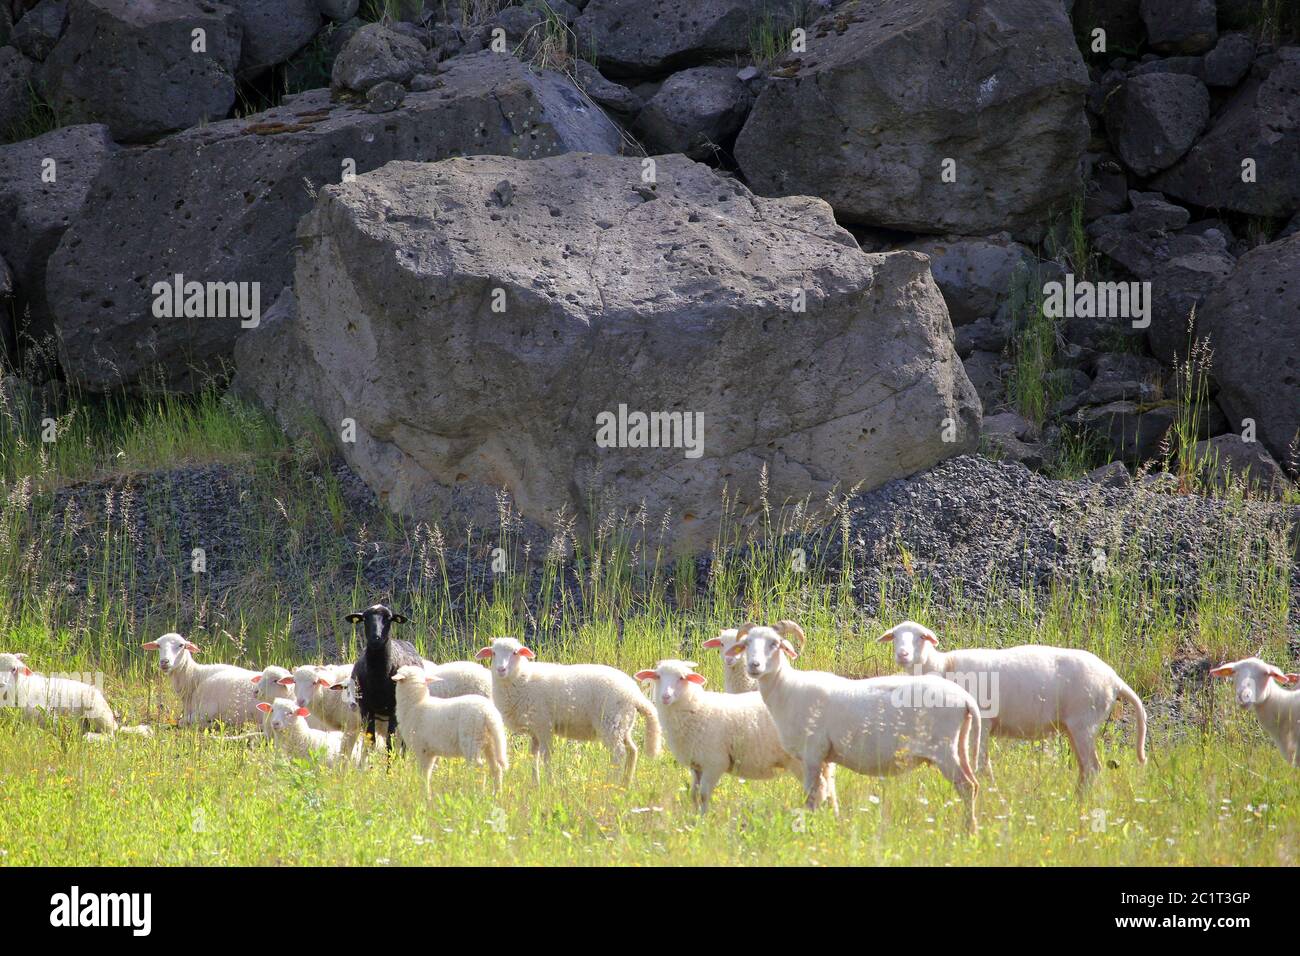 Sheep in the quarry Stock Photo